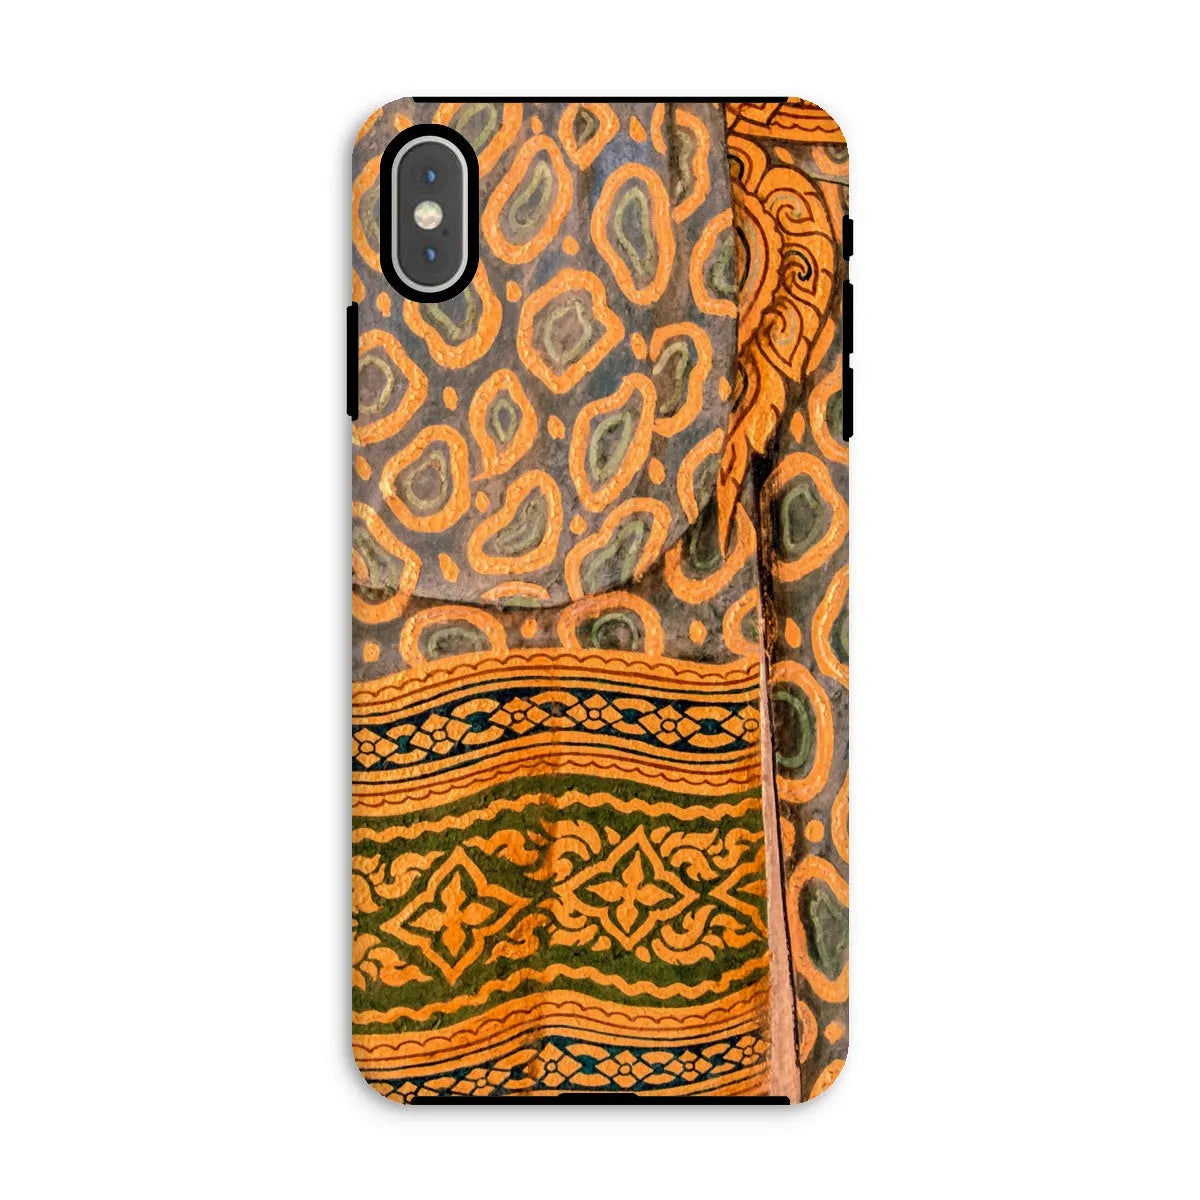 Lady In Waiting - Thai Aesthetic Art Phone Case - Iphone Xs Max / Matte - Mobile Phone Cases - Aesthetic Art